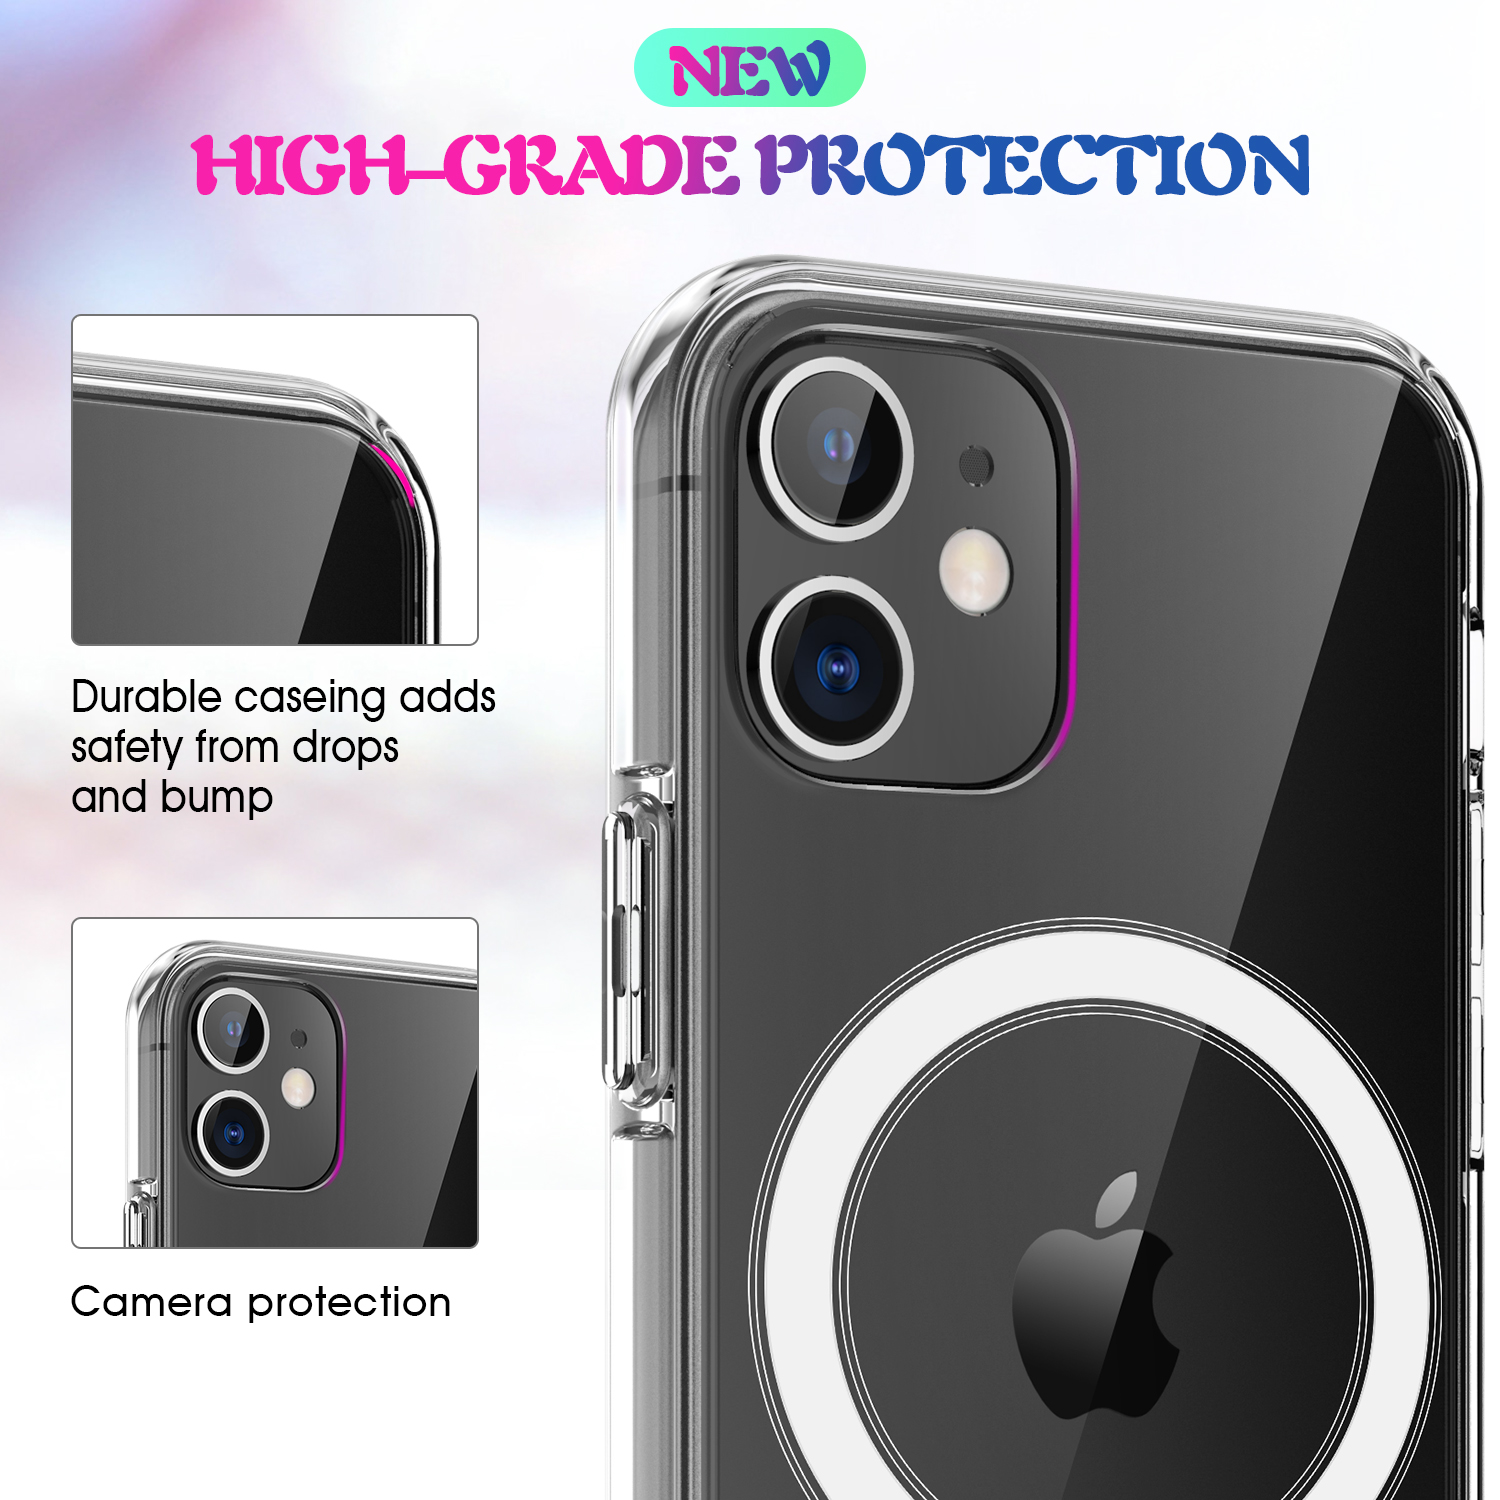 Transparent Clear Acrylic Waterproof Case for iPhone 12 Pro Max 4